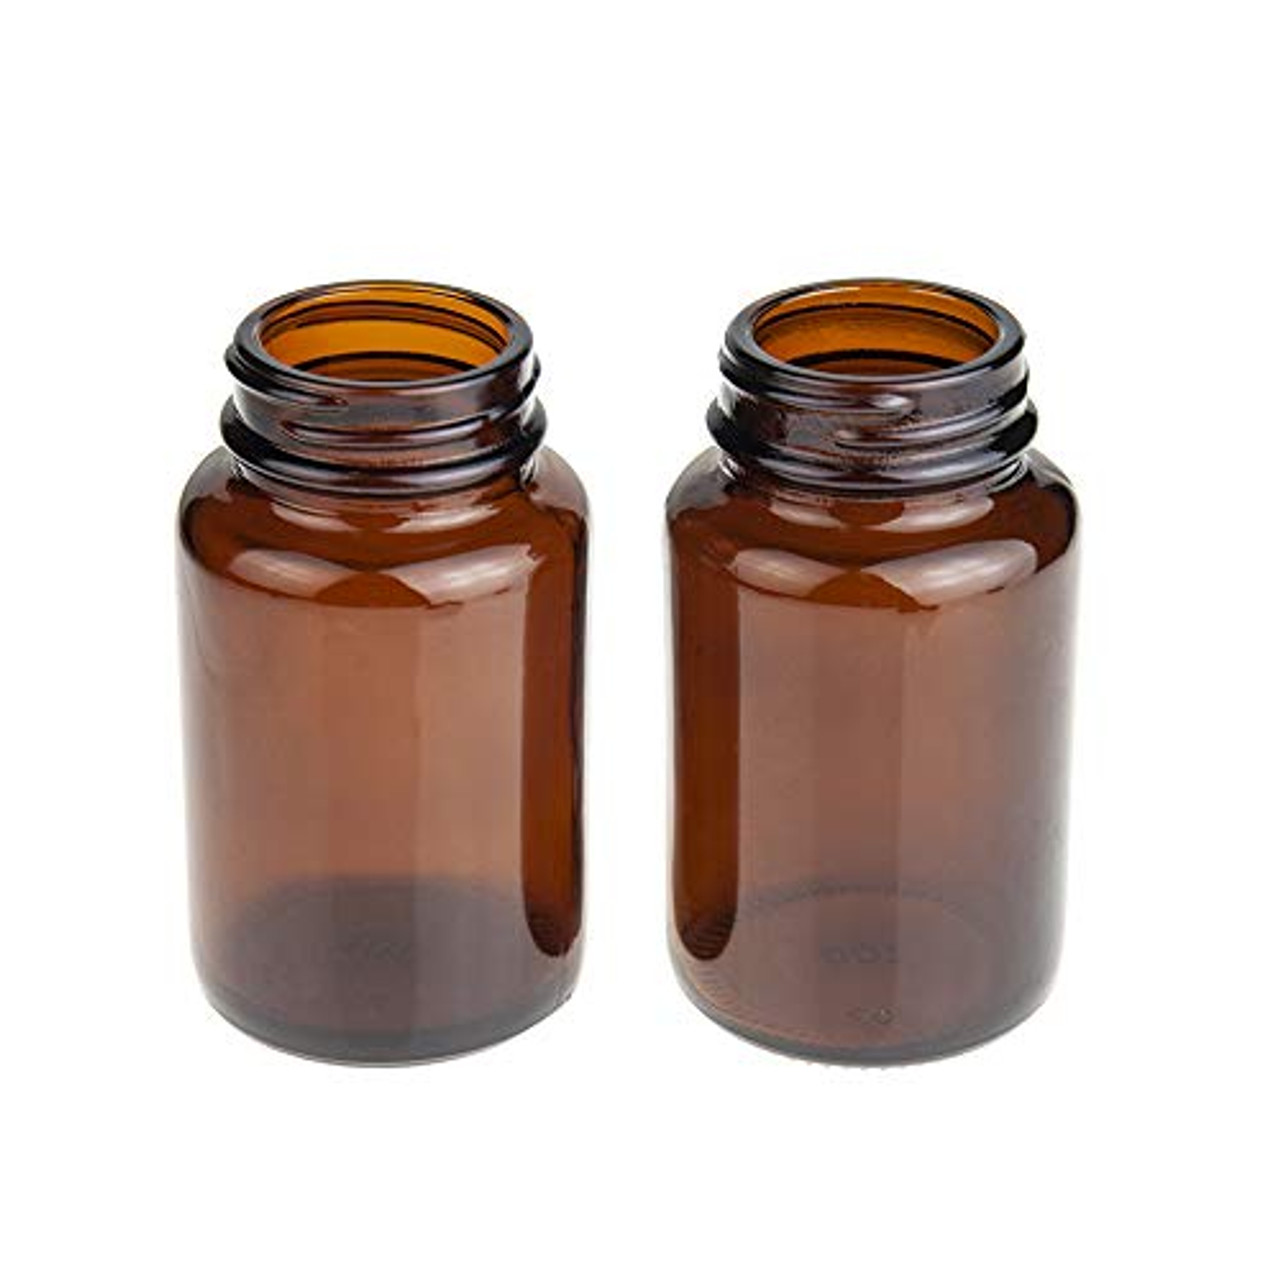 100 cc Amber Glass Wide Mouth Packer Bottles 38-400 Neck Finish